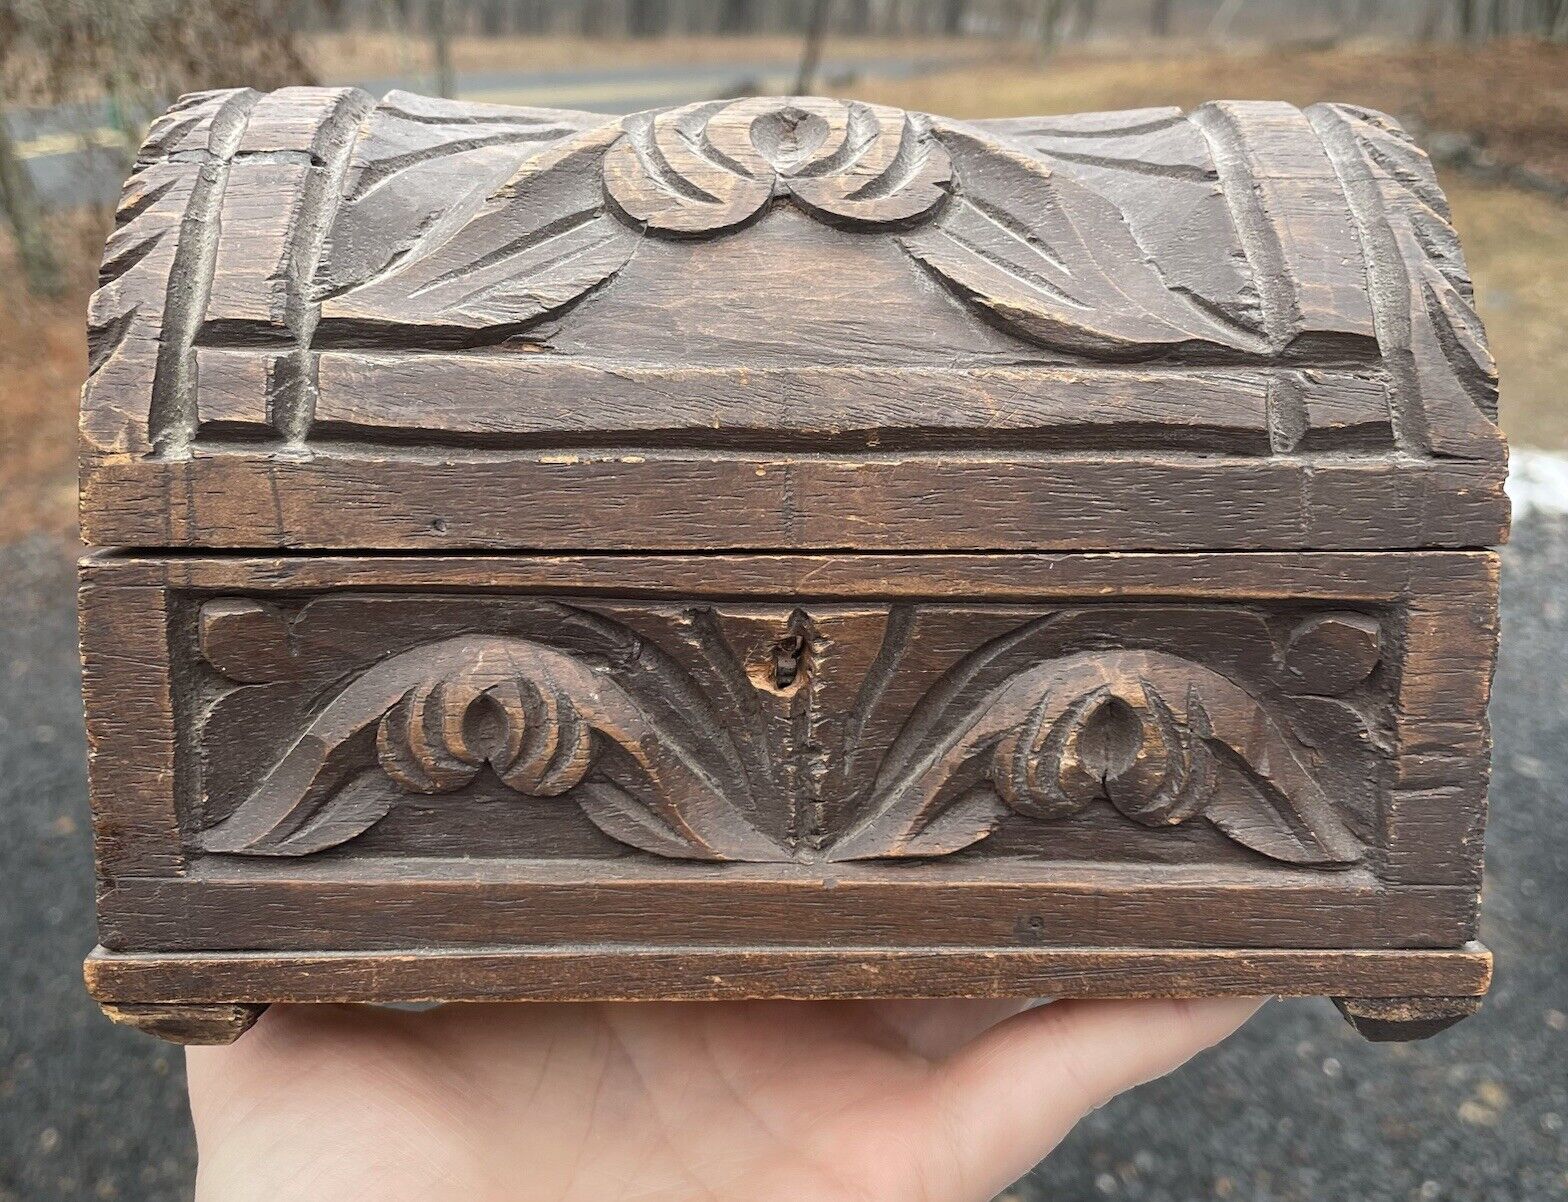 Vintage Folk Art Wooden Dome Topped Chest Mexico Treasure Box 20th C.